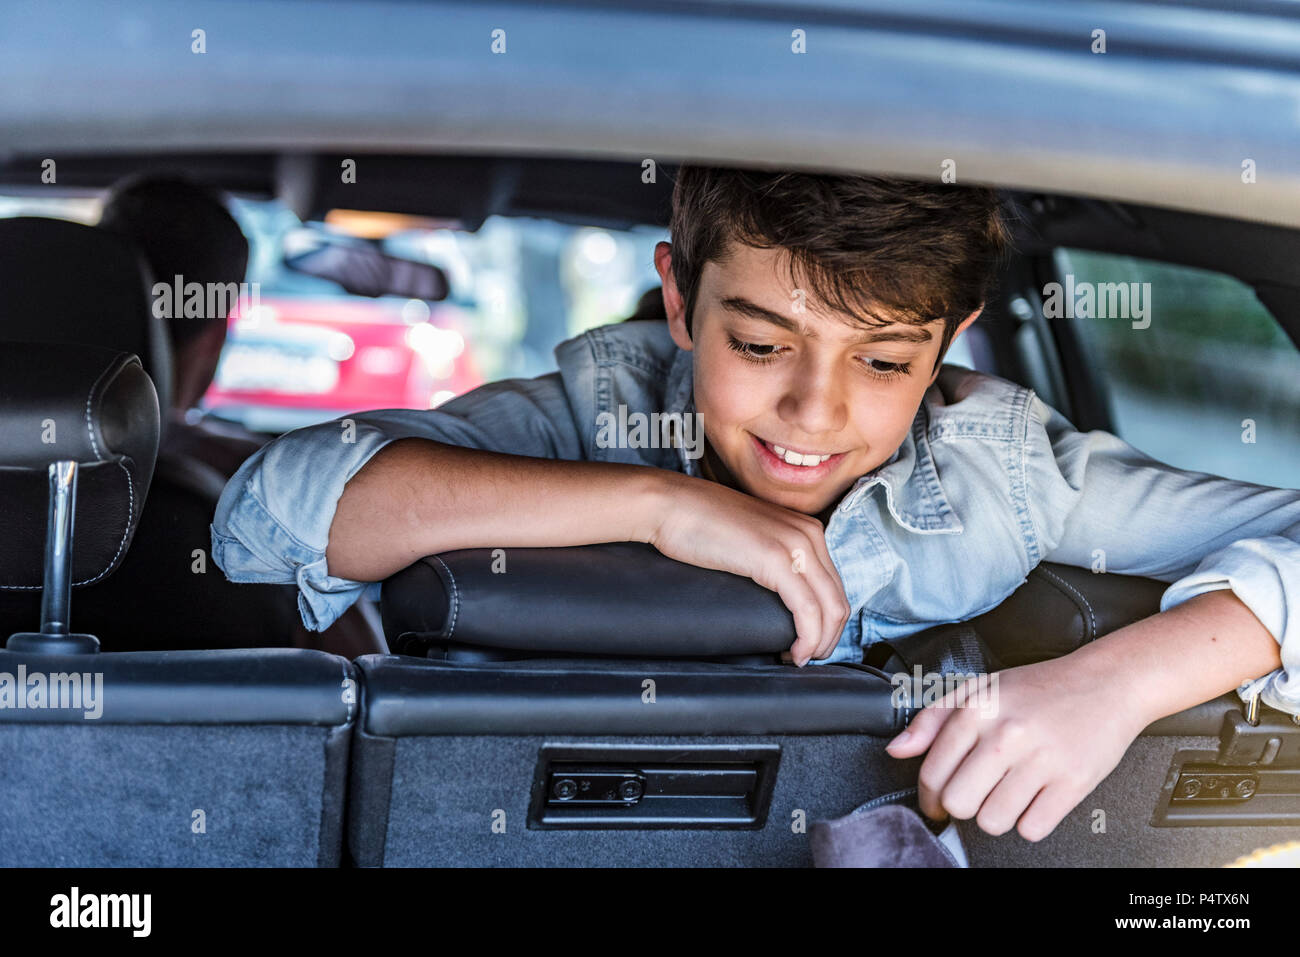 Smiling boy in car looking dans boot Banque D'Images